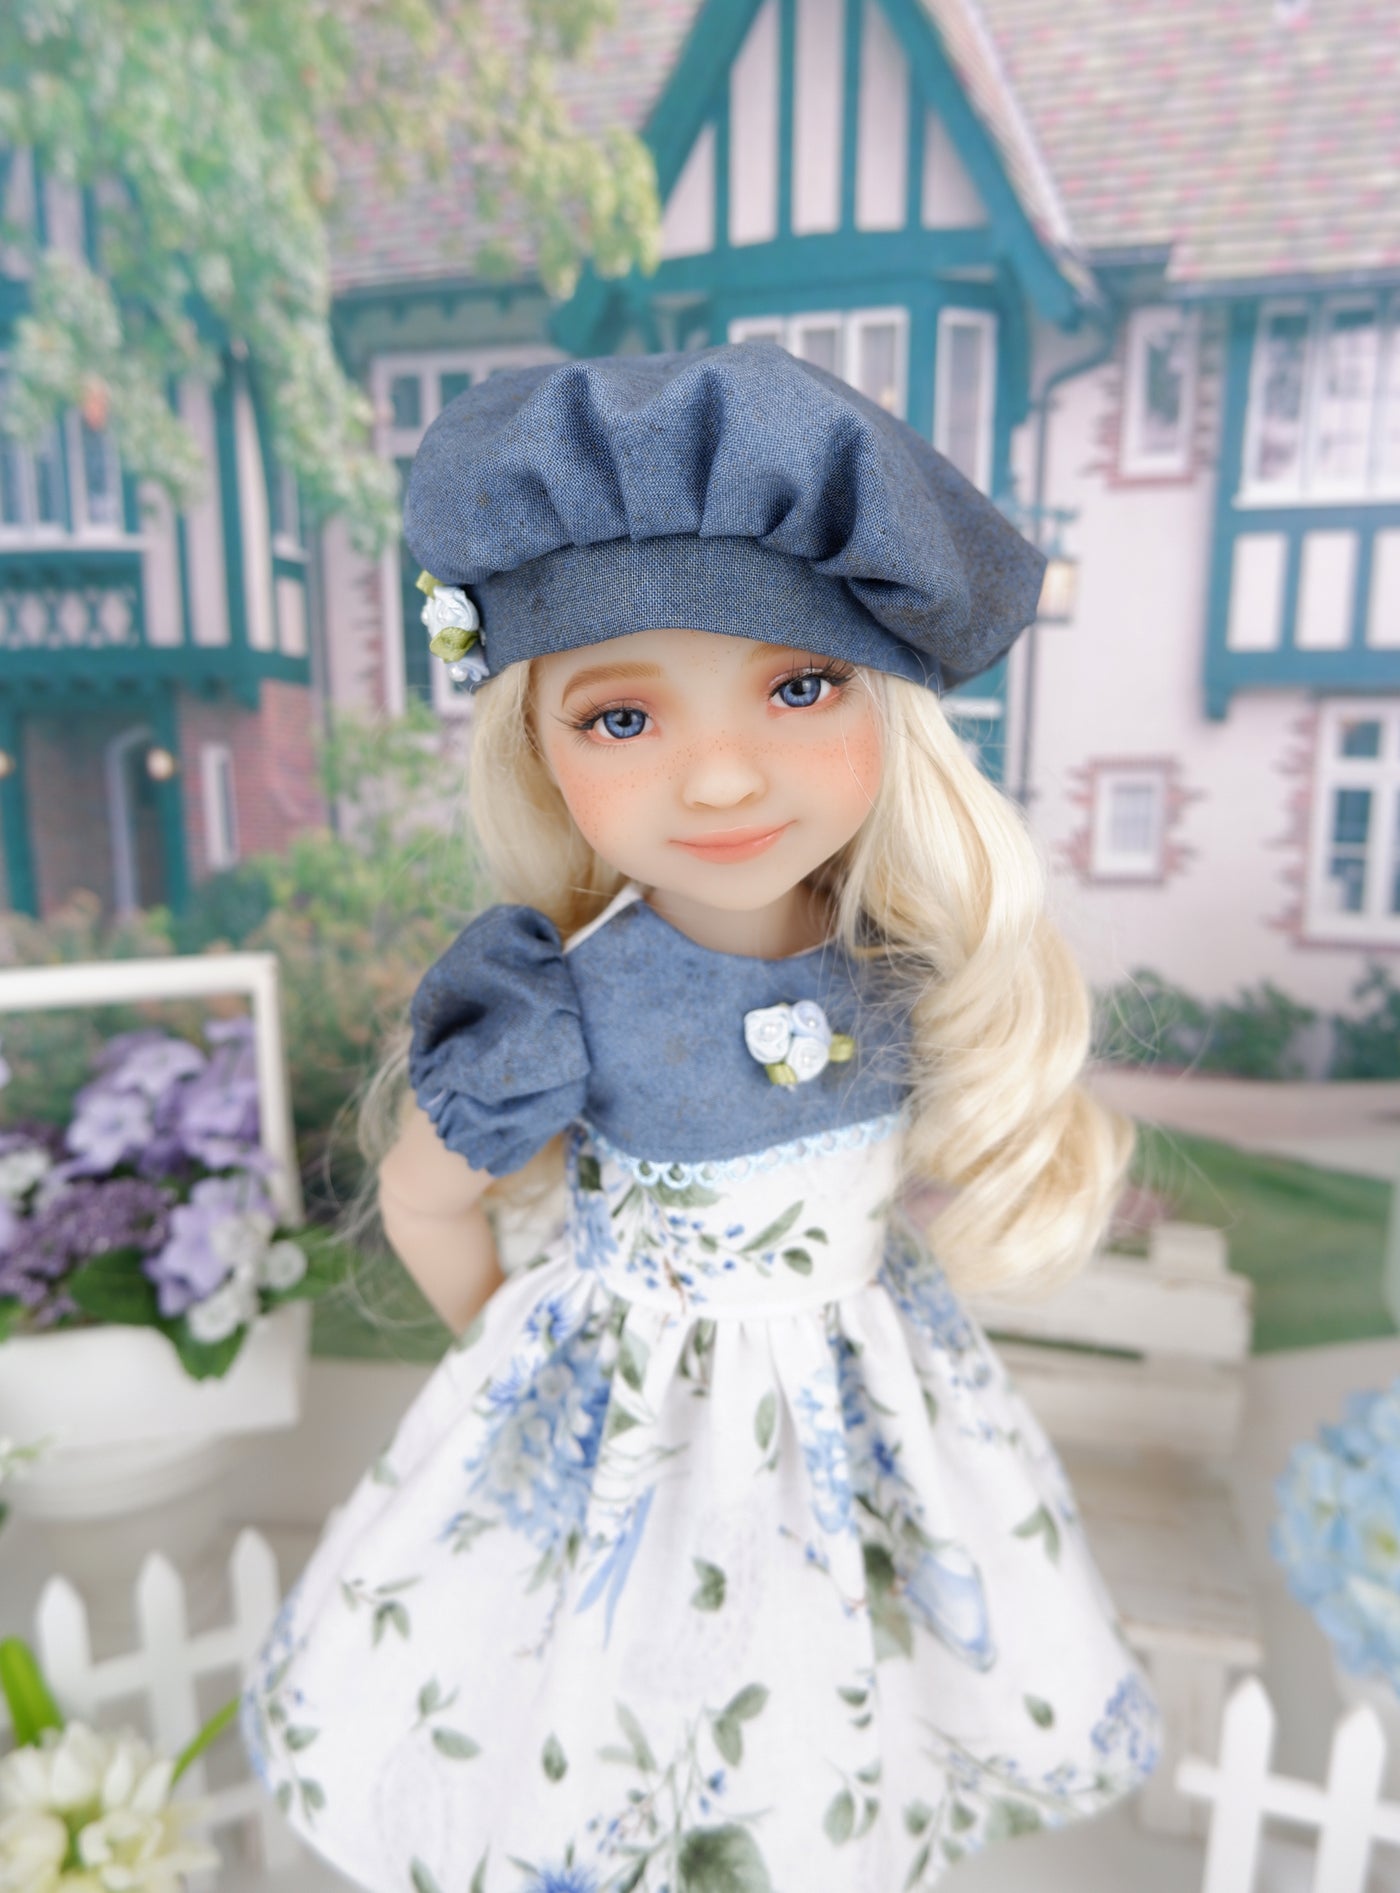 Blissful Blooms - dress ensemble with shoes for Ruby Red Fashion Friends doll